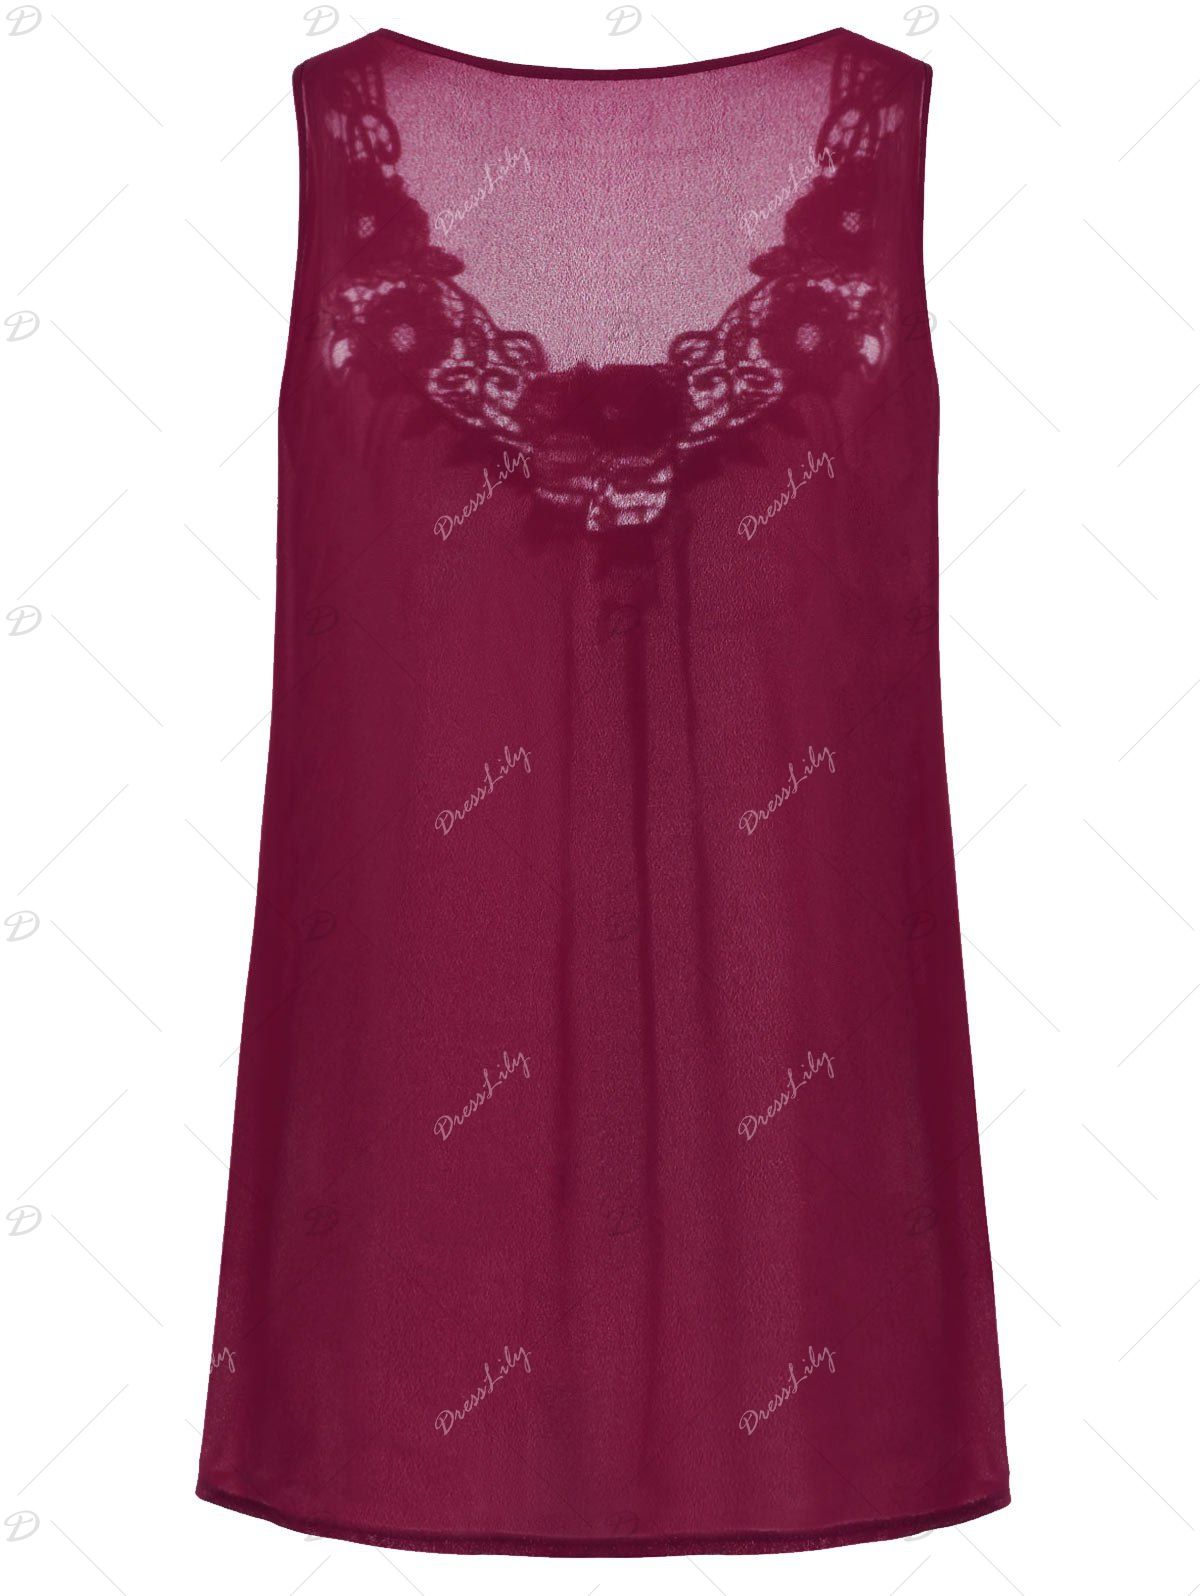 DressLily.com: Photo Gallery - Embroidered Sleeveless Chiffon Plus Size Top